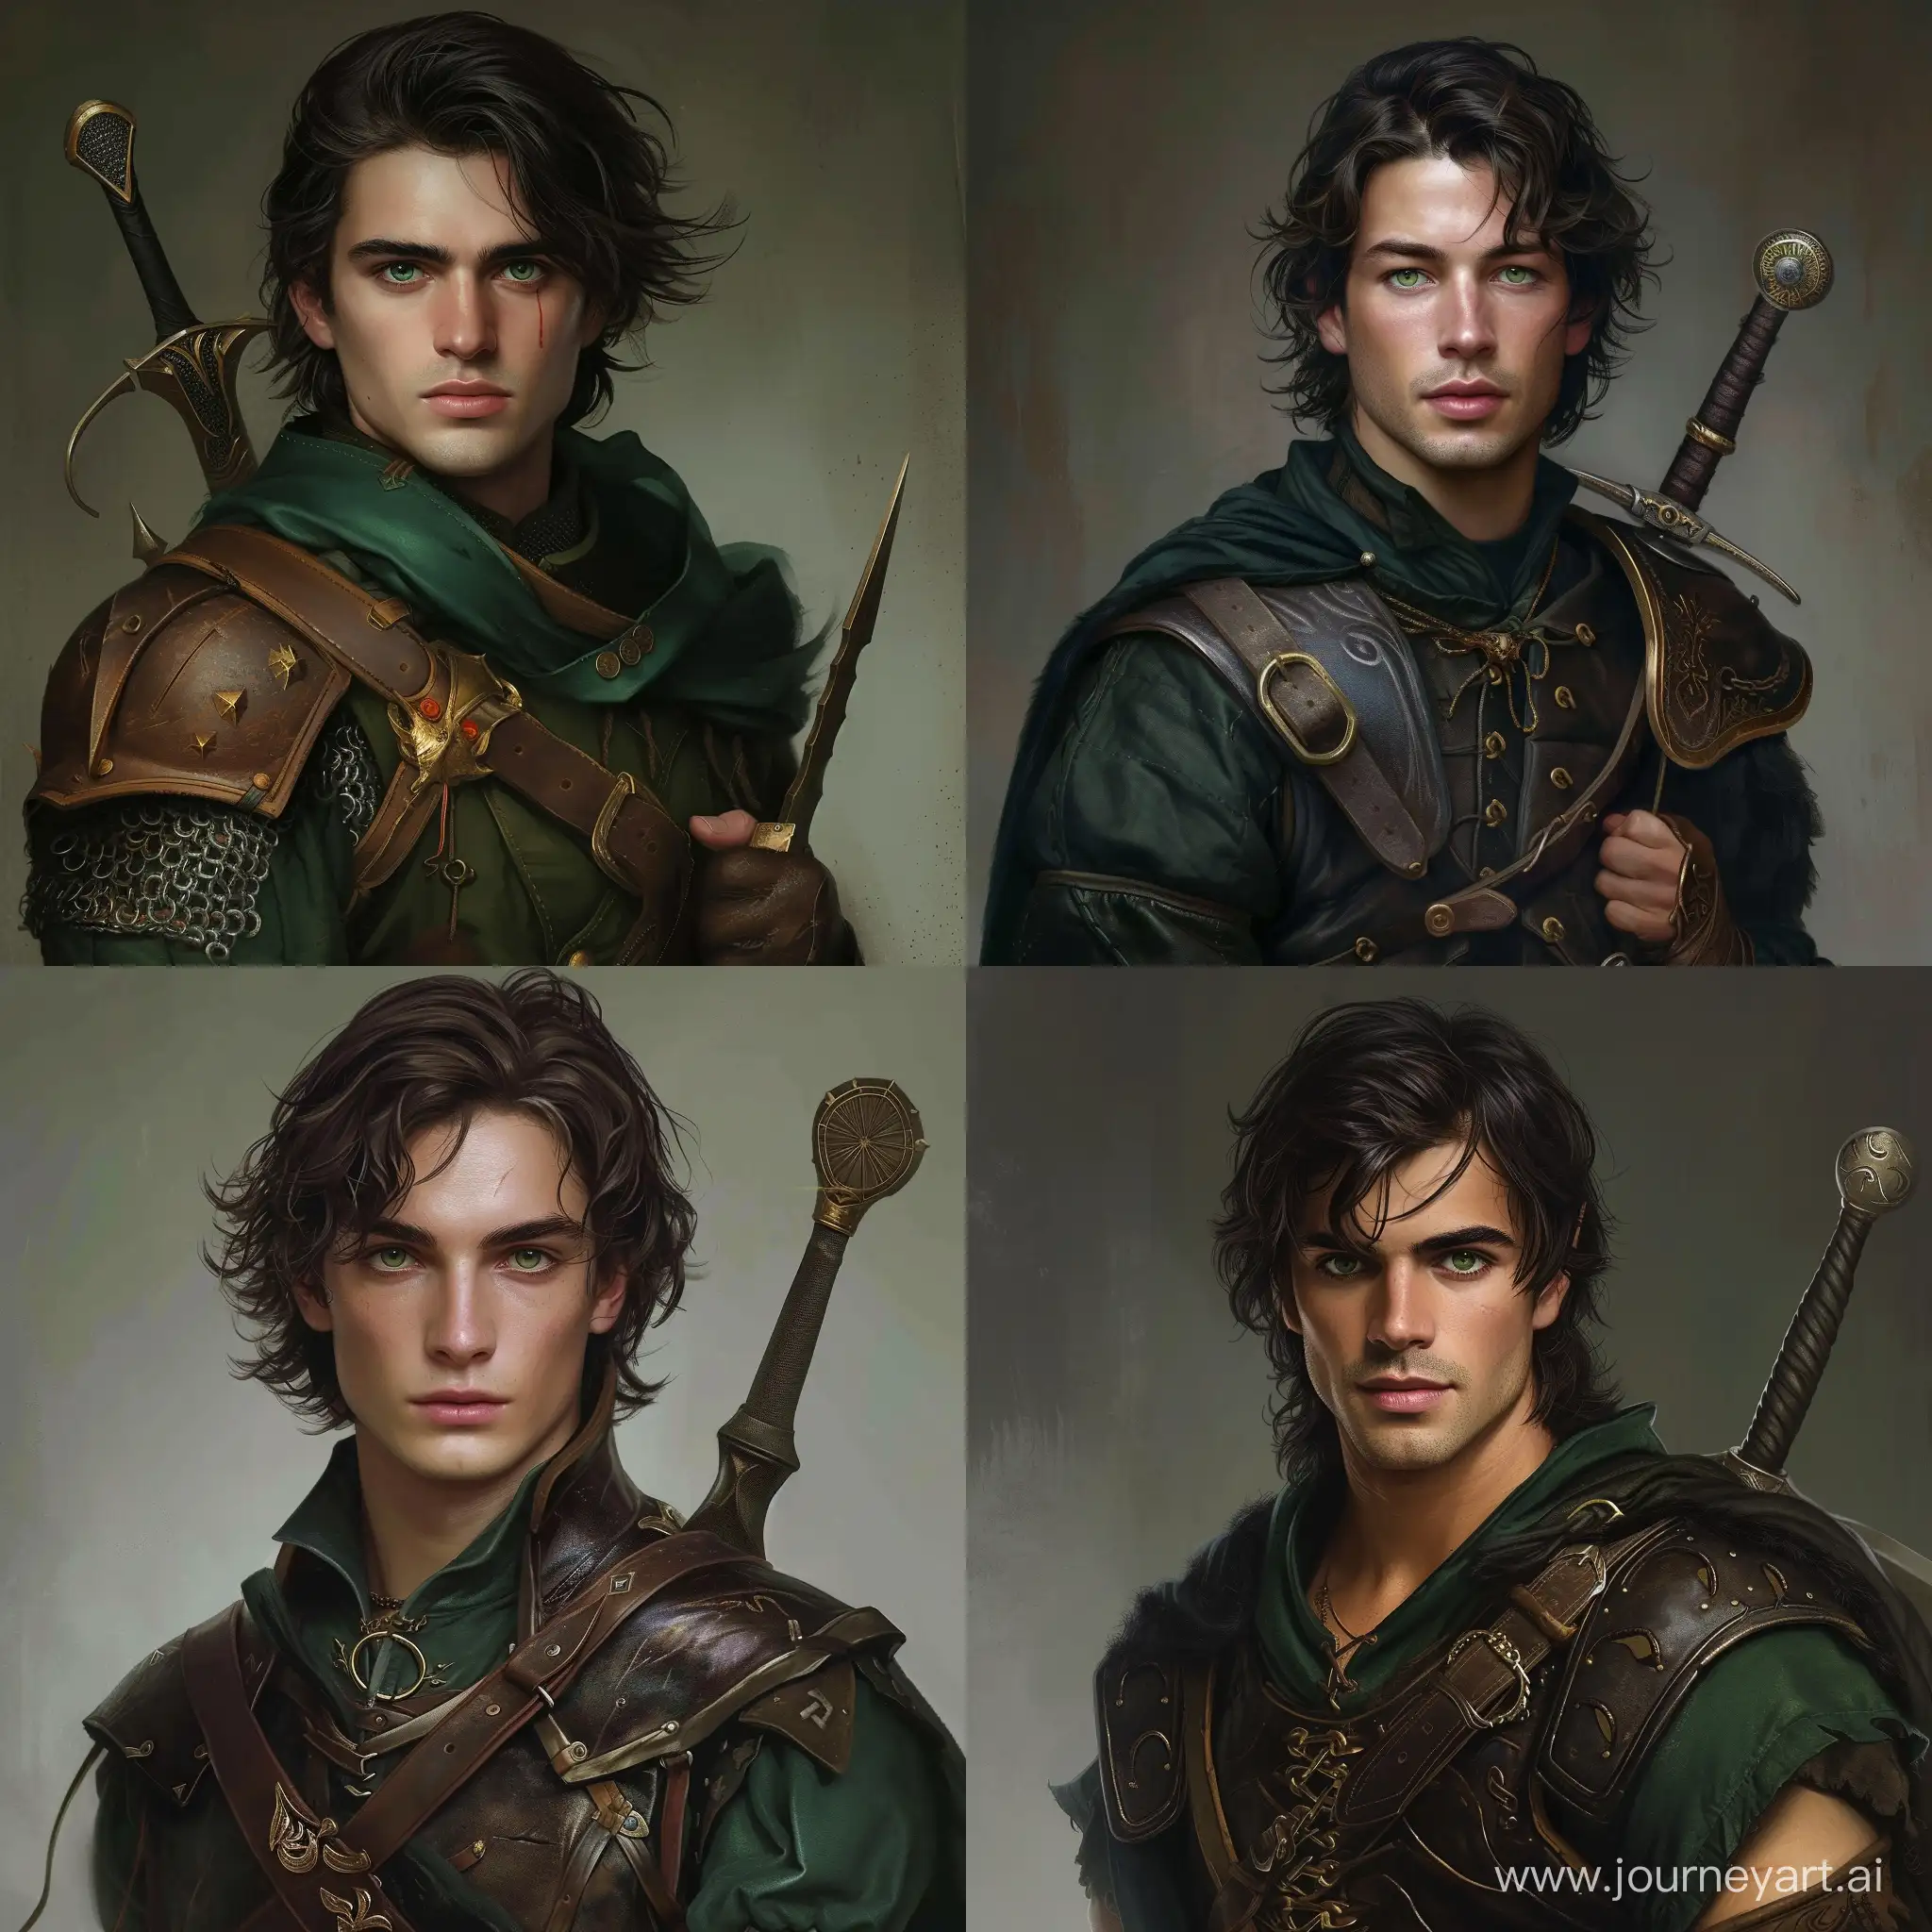 make a man, a 26-year-old man with dark brown medium-length hair, medium height, green eyes, dark green clothes, and on top of it a leather armor and a short sword in his hand, in the style of magic and Scandinavia